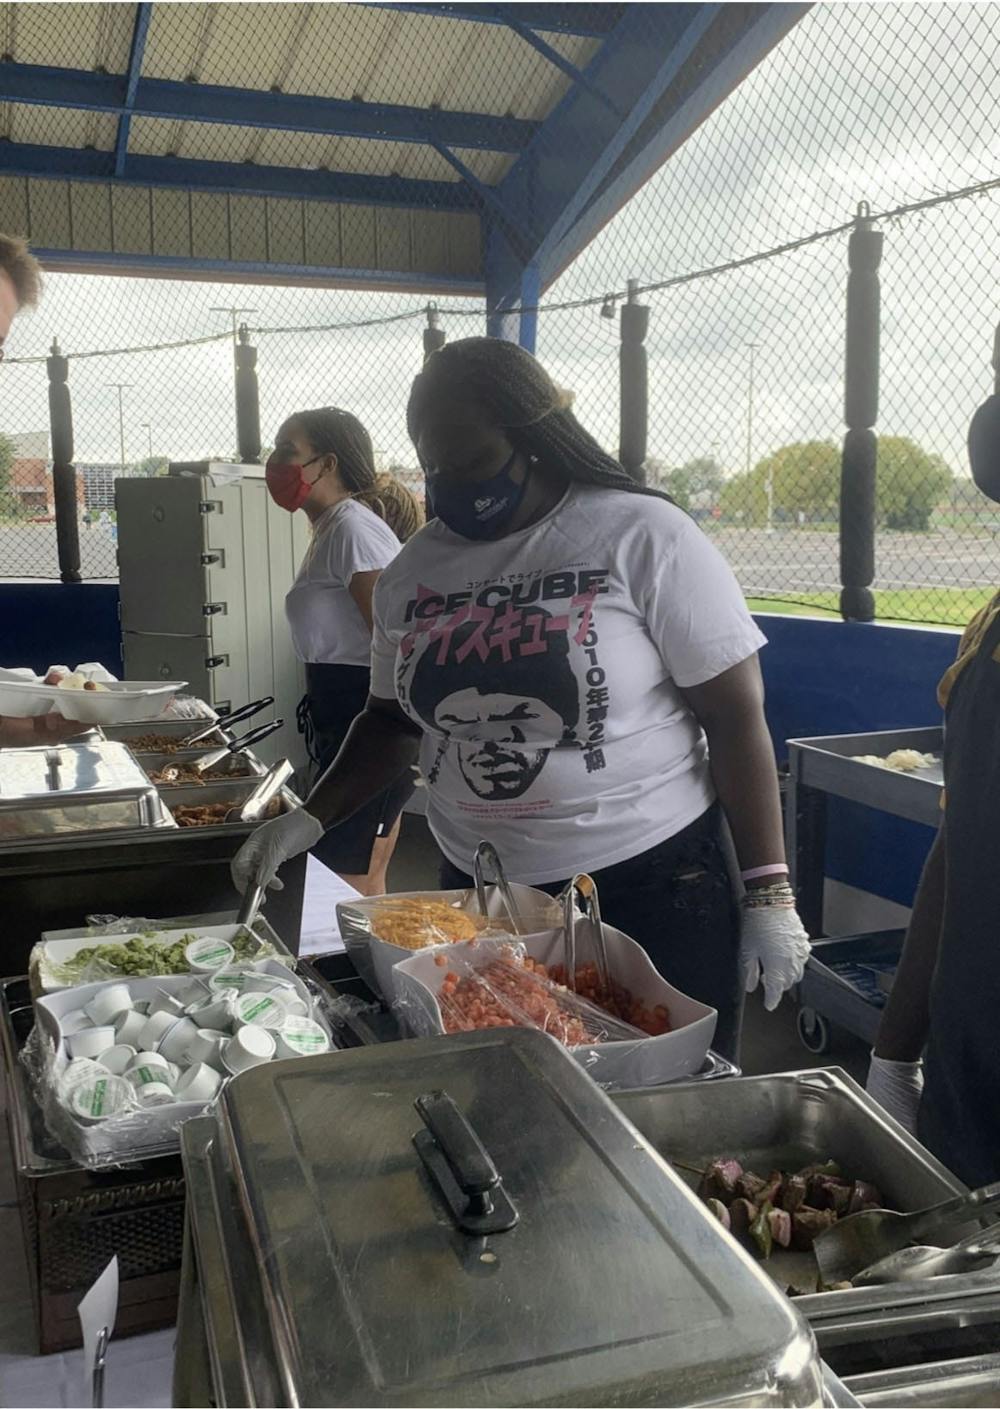 LSO hosts Latino-style cookout to celebrate Hispanic Heritage Month